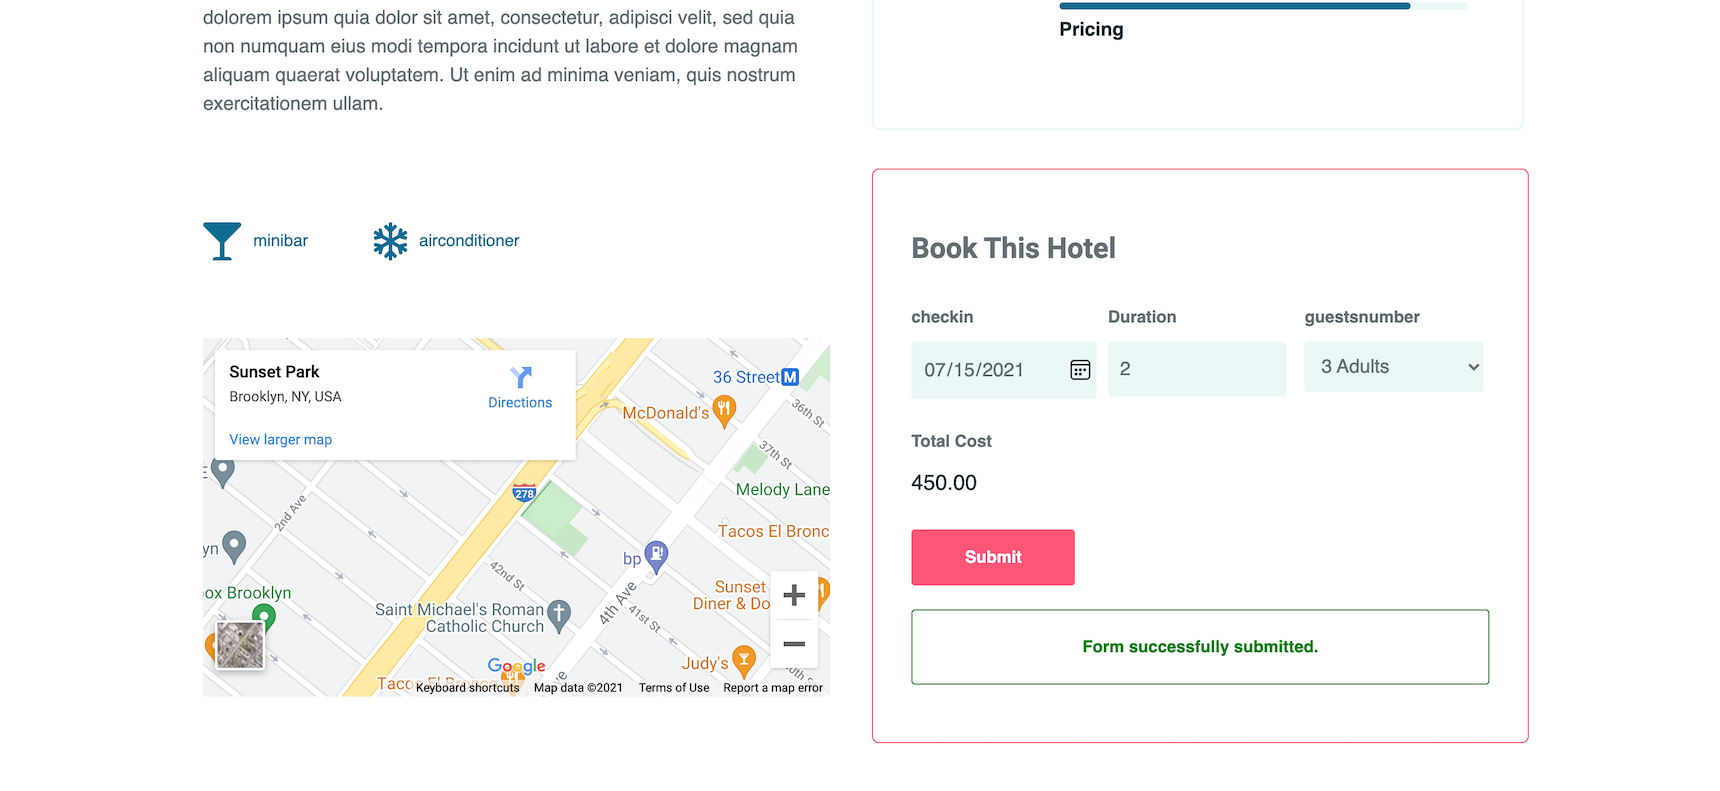 building a dynamic hotel website - the booking form